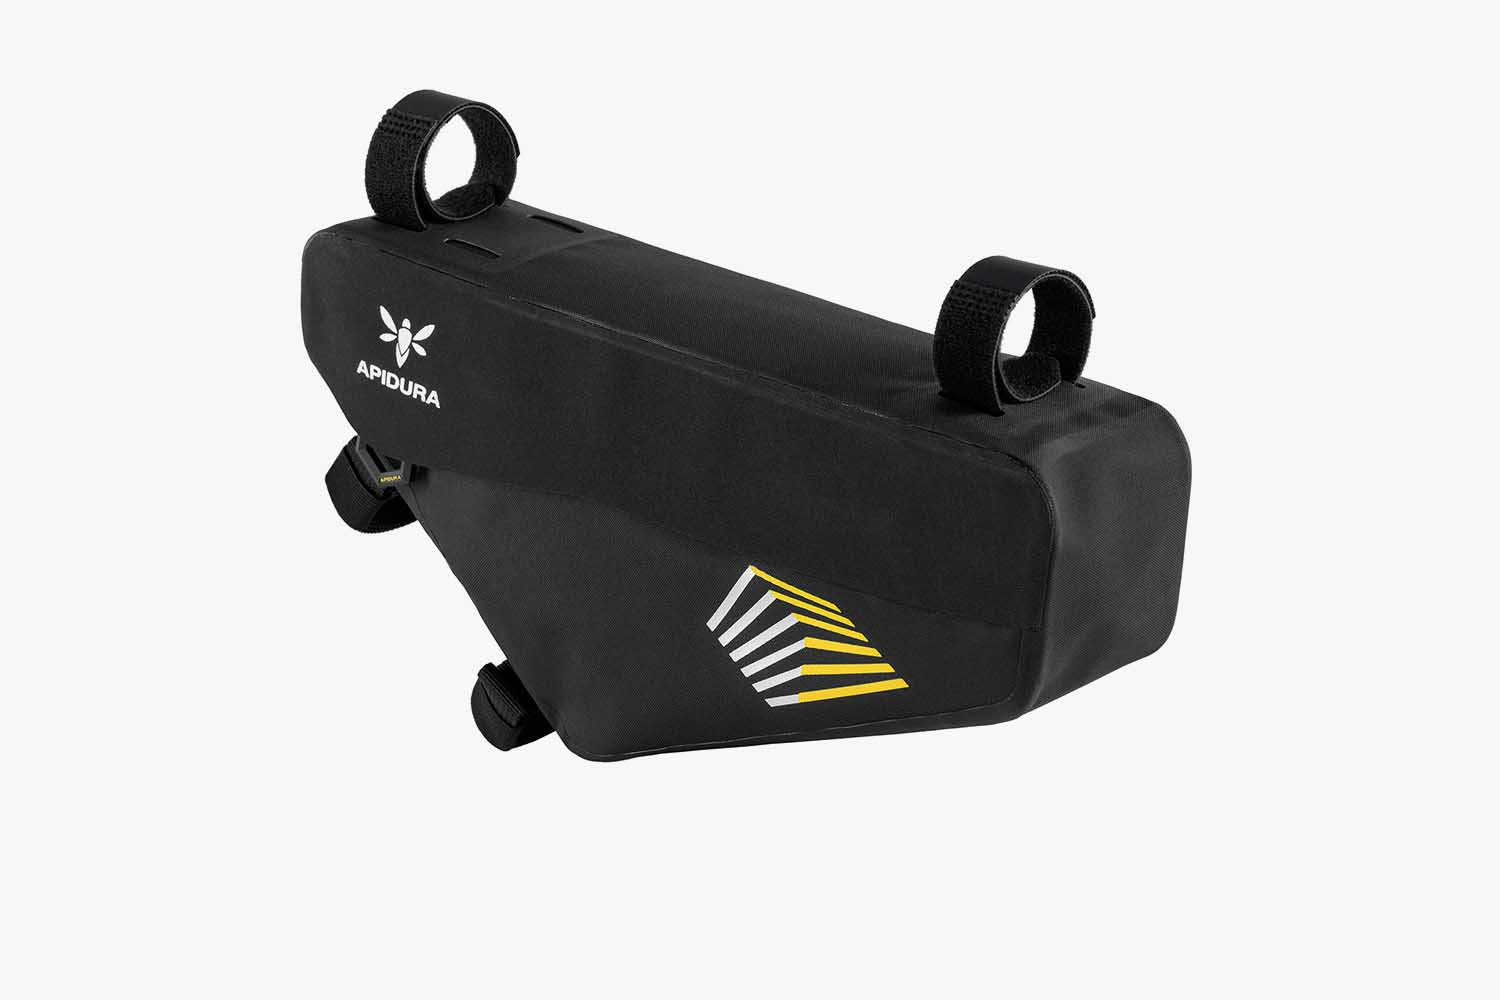 Apidura Racing Frame Pack on white background upside down